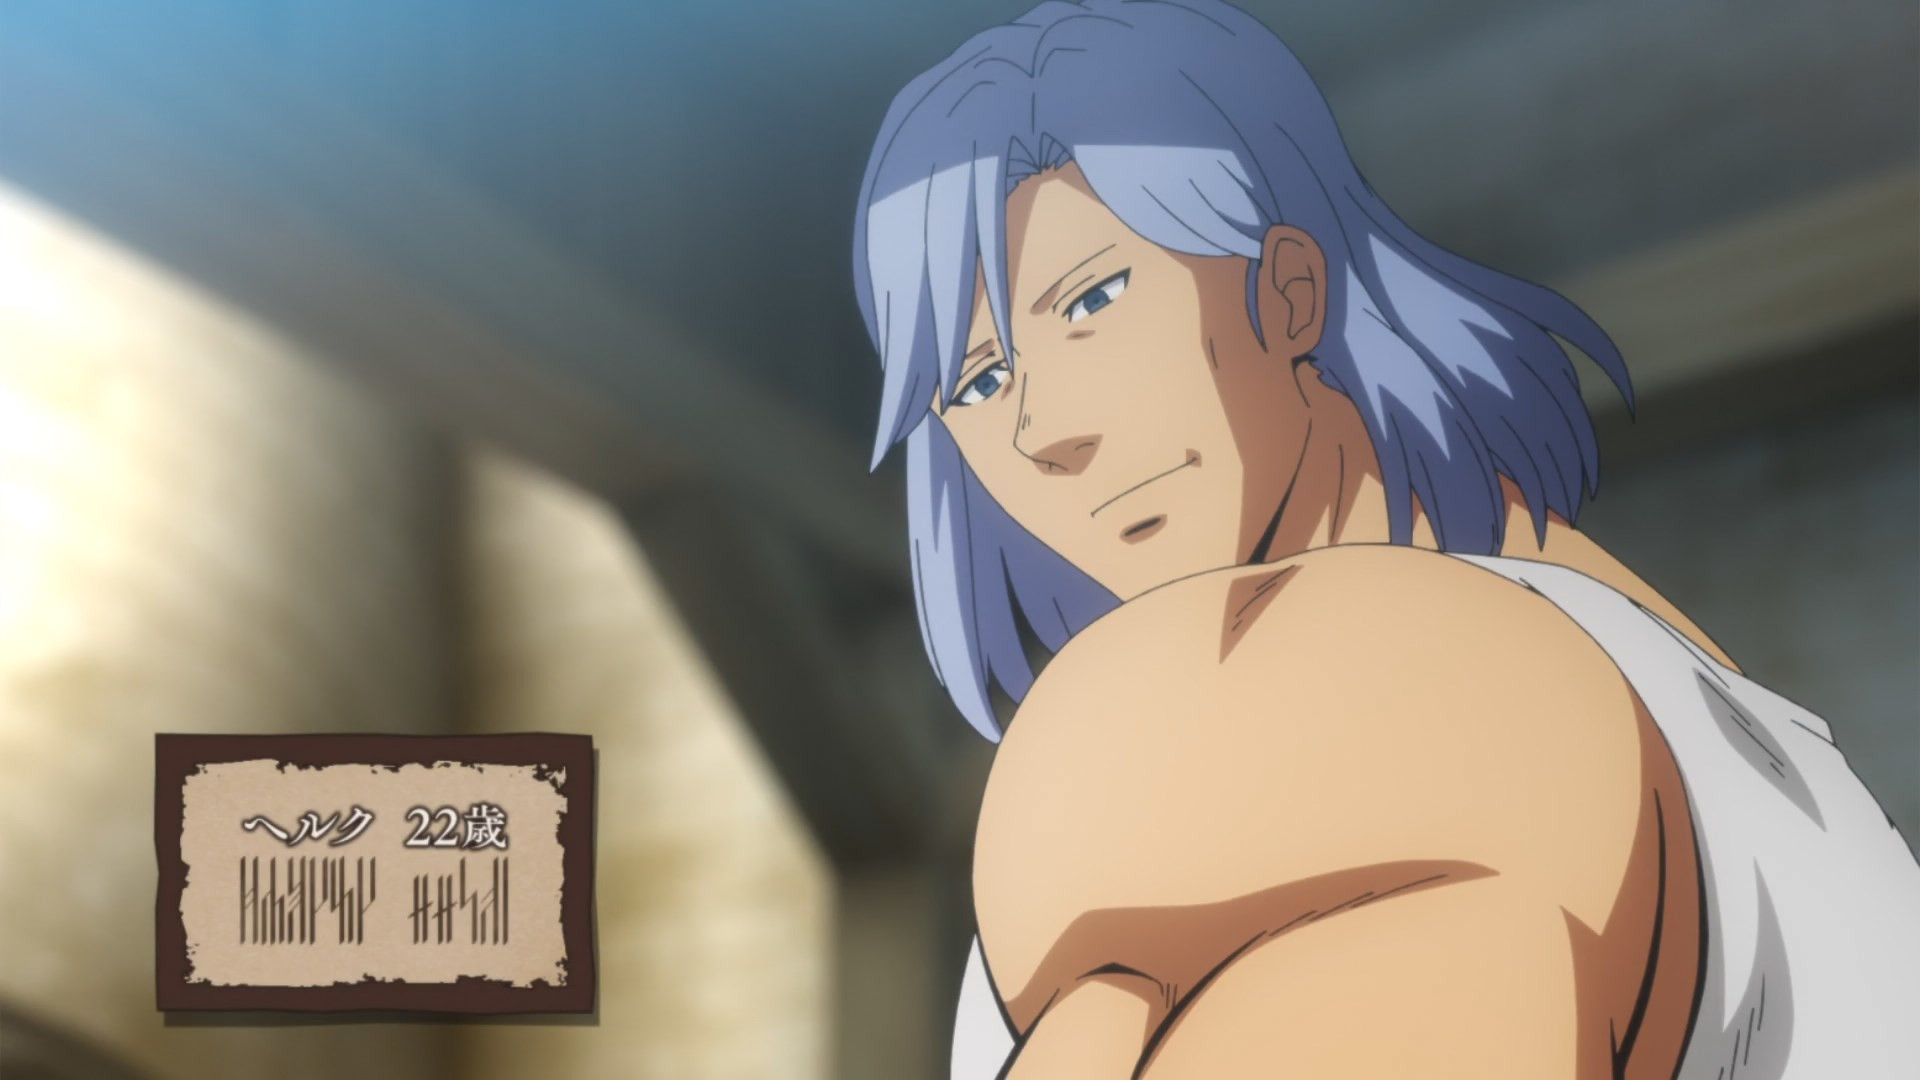 Helck set for July 2023 premiere, reveals new trailer - Gamicsoft